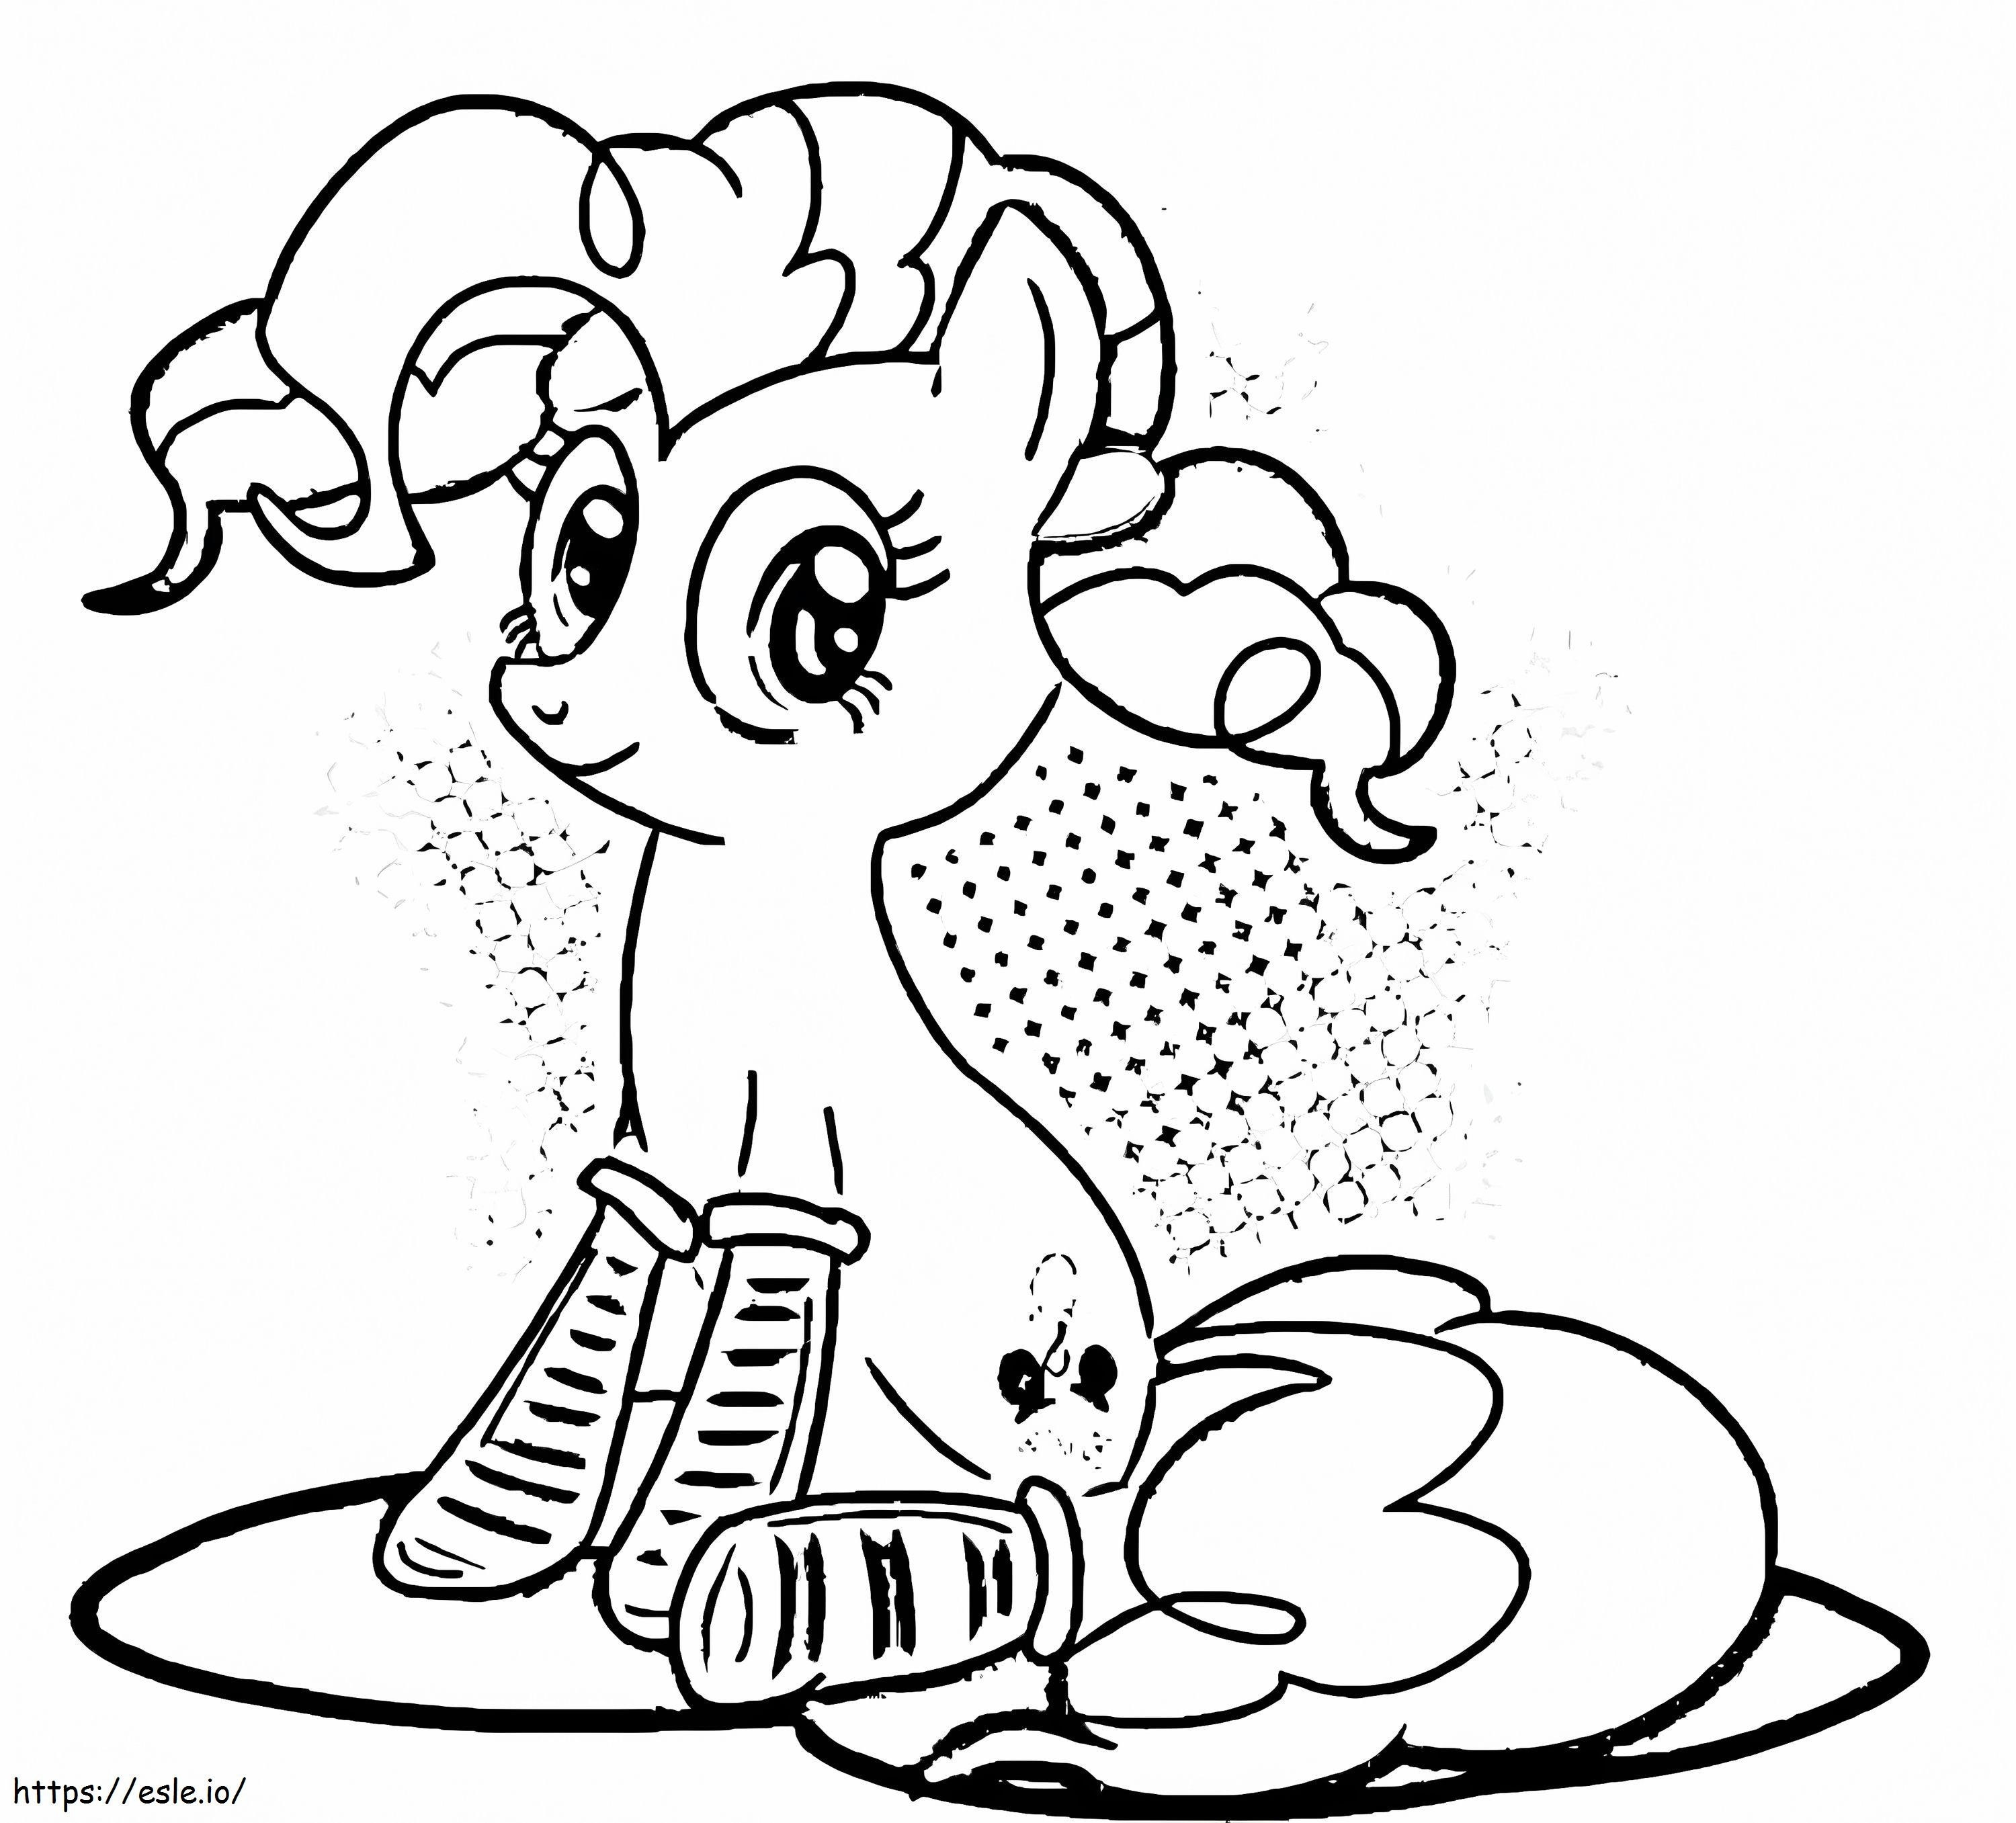 Little Pony Pinkie Pie coloring page